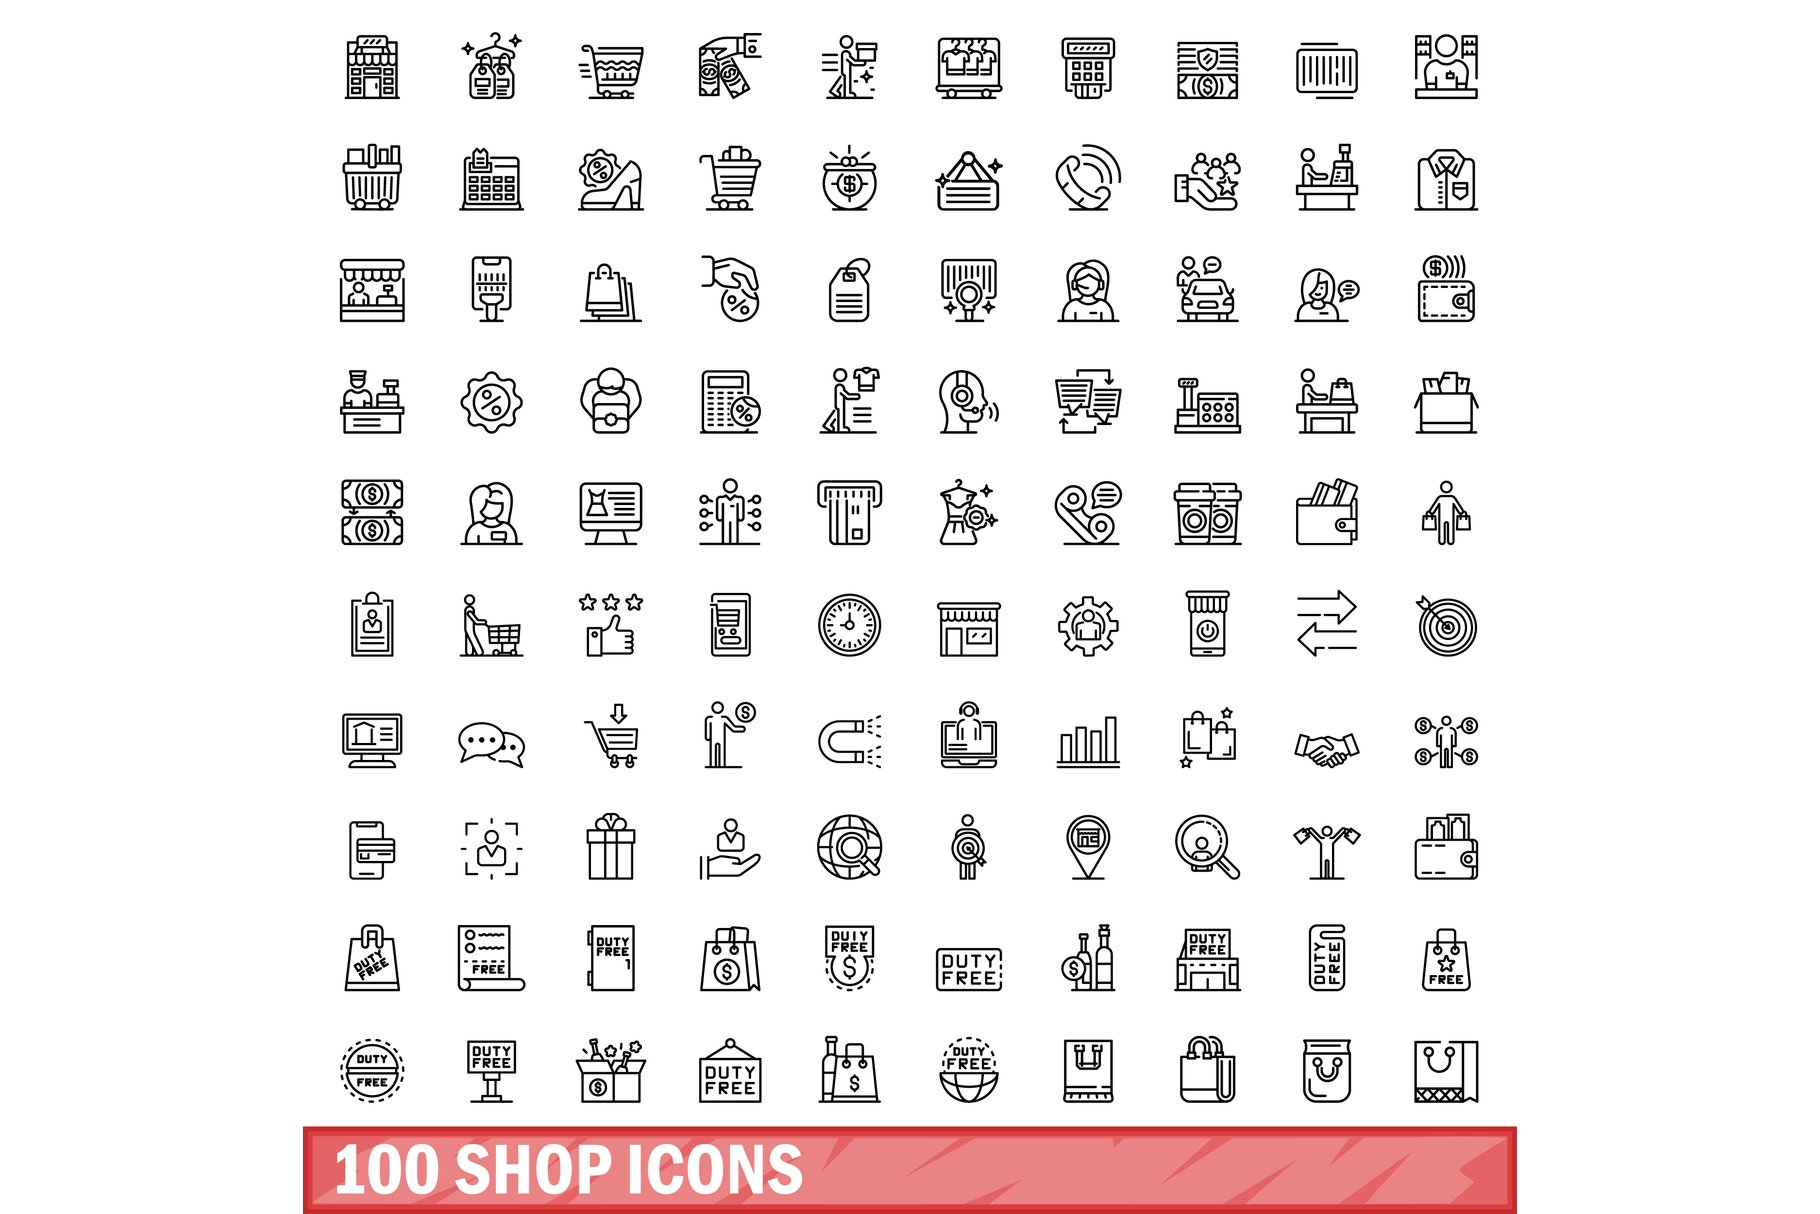 100 shop icons set, outline style cover image.